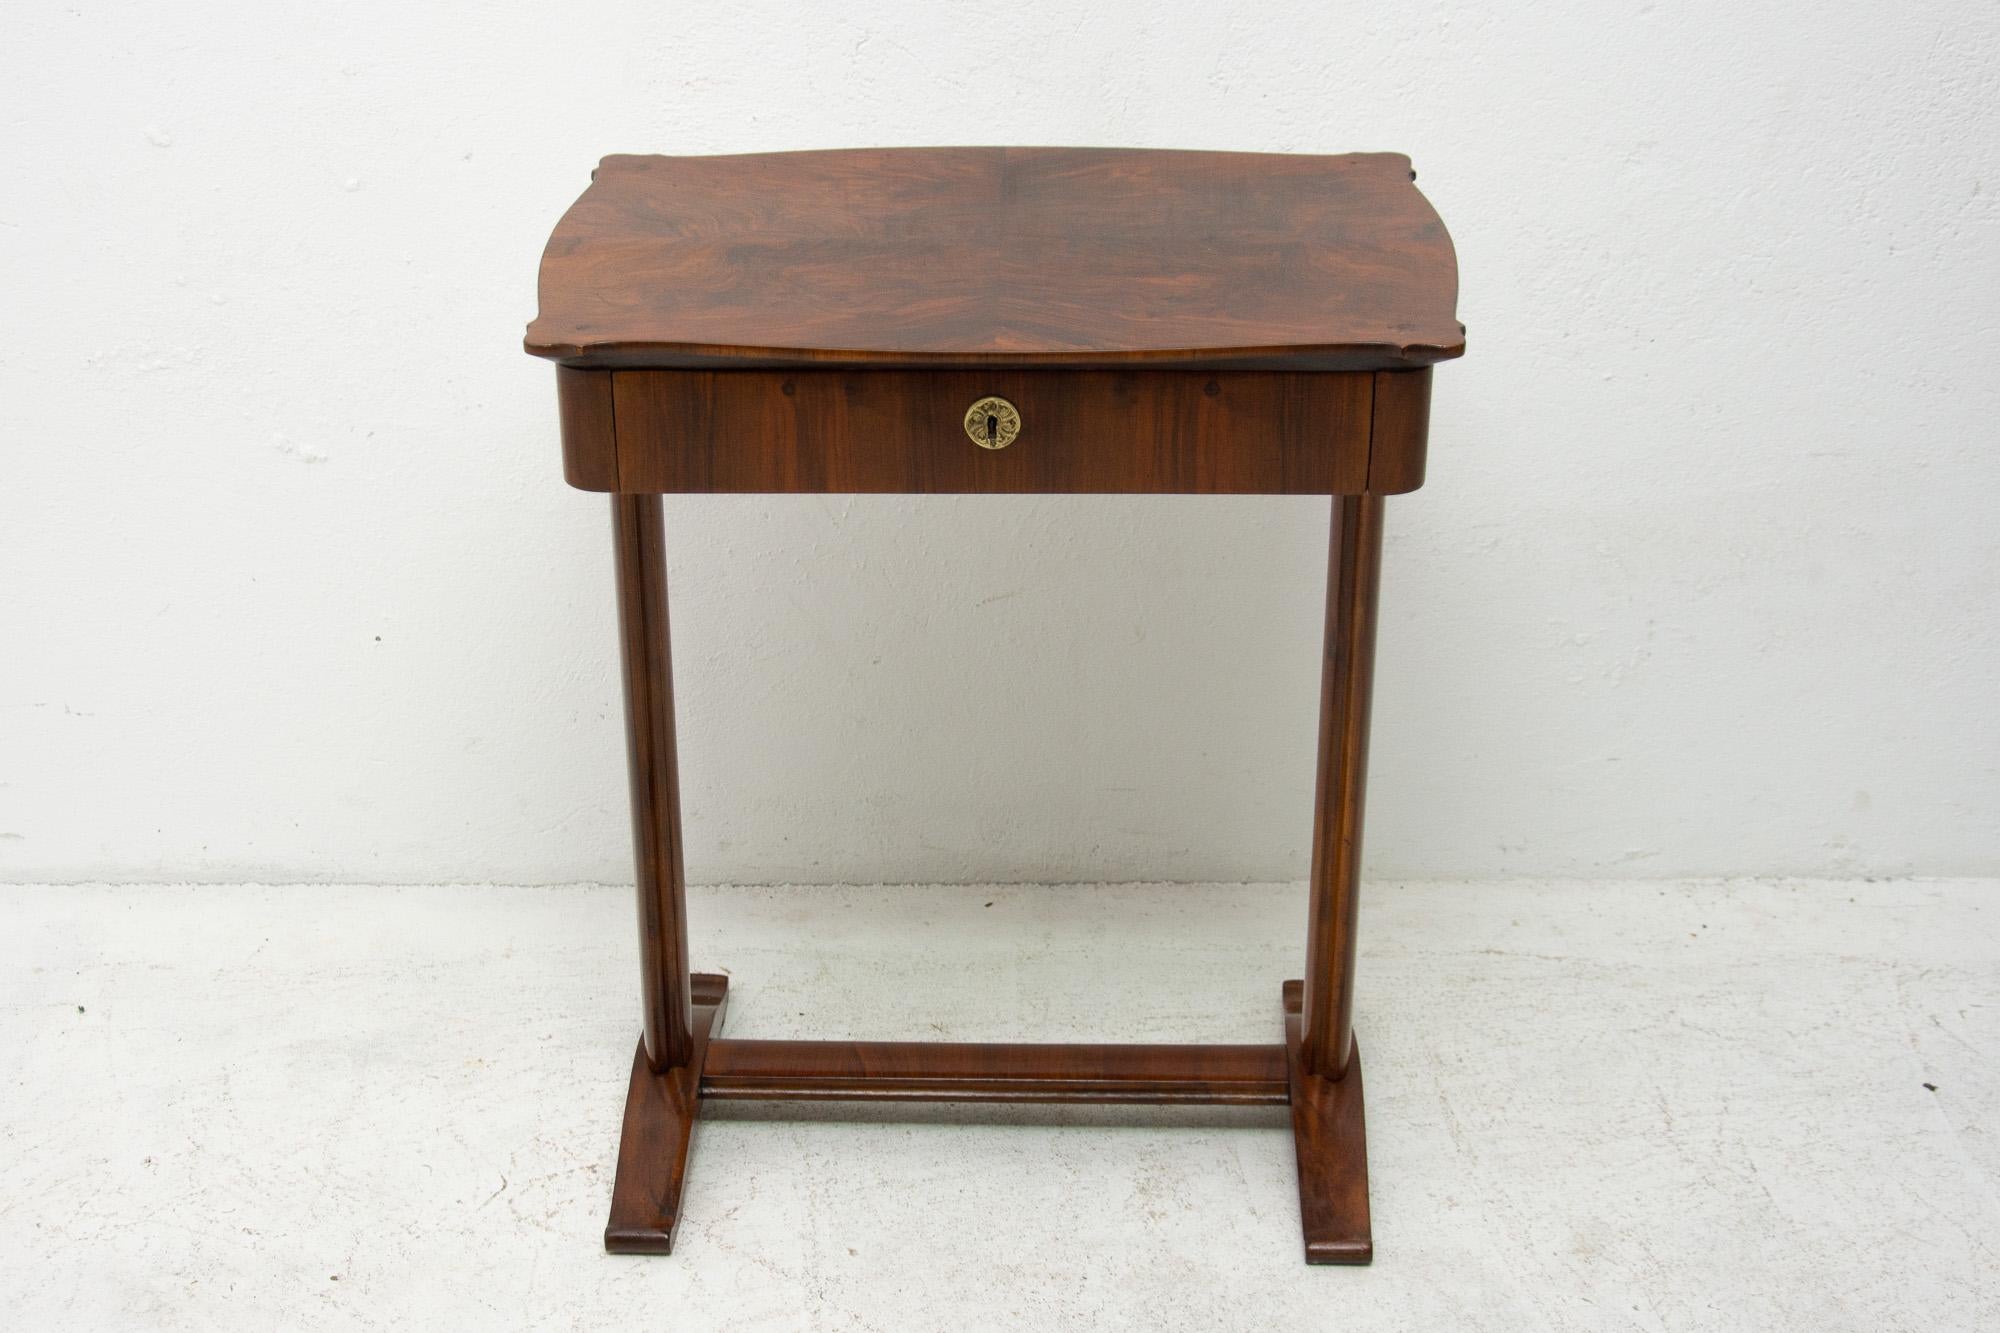 Very nice sewing table with a fine veneer picture. The table dates back to the early Biedermeier period. It was made in the former Austria-Hungary monarchy, circa 1830. It's made in walnut veneer.
The table is fully refurbished and hand-polished